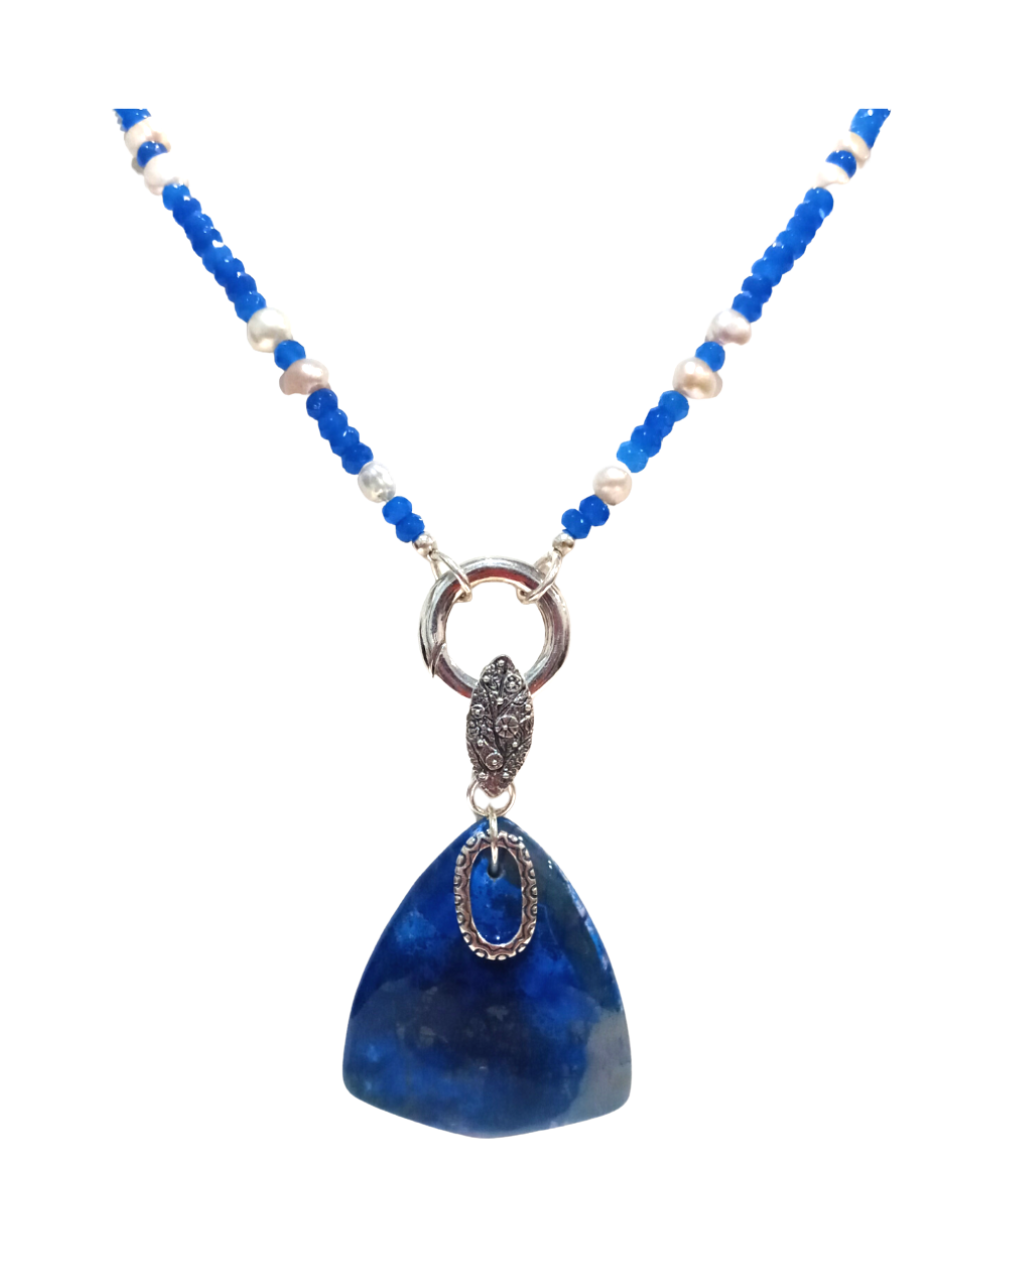 Interchangeable Blue Agate and Pearl Necklace with Removable Large Extraordinary Blue Agate Enhancer Pendant. ONE ONLY